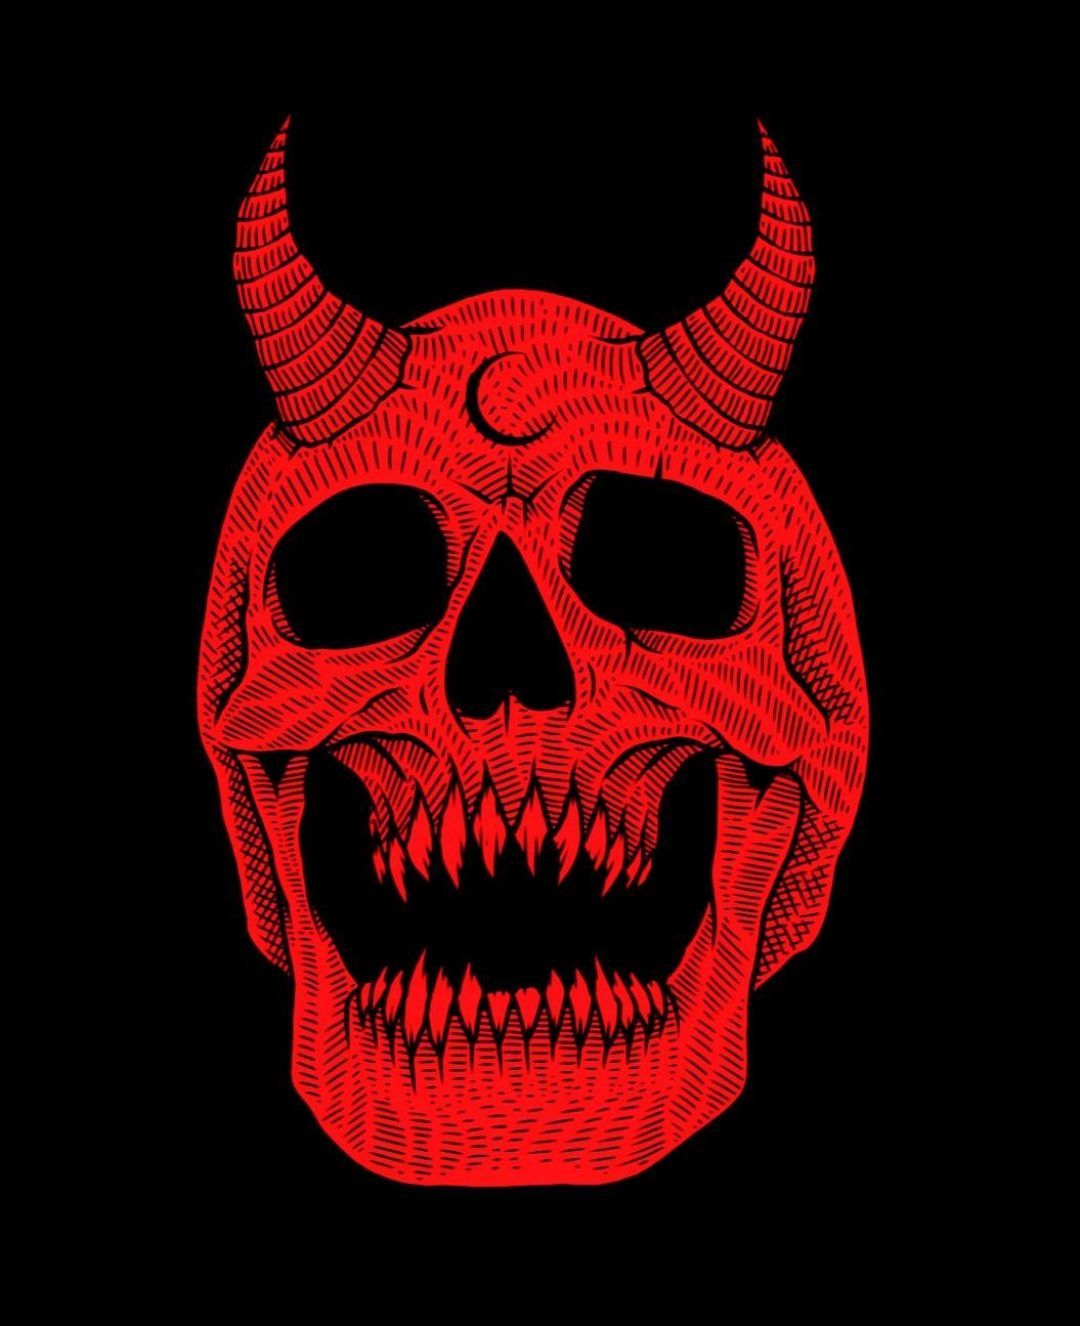 Red skull with horns and fangs on a black background - Skeleton, skull